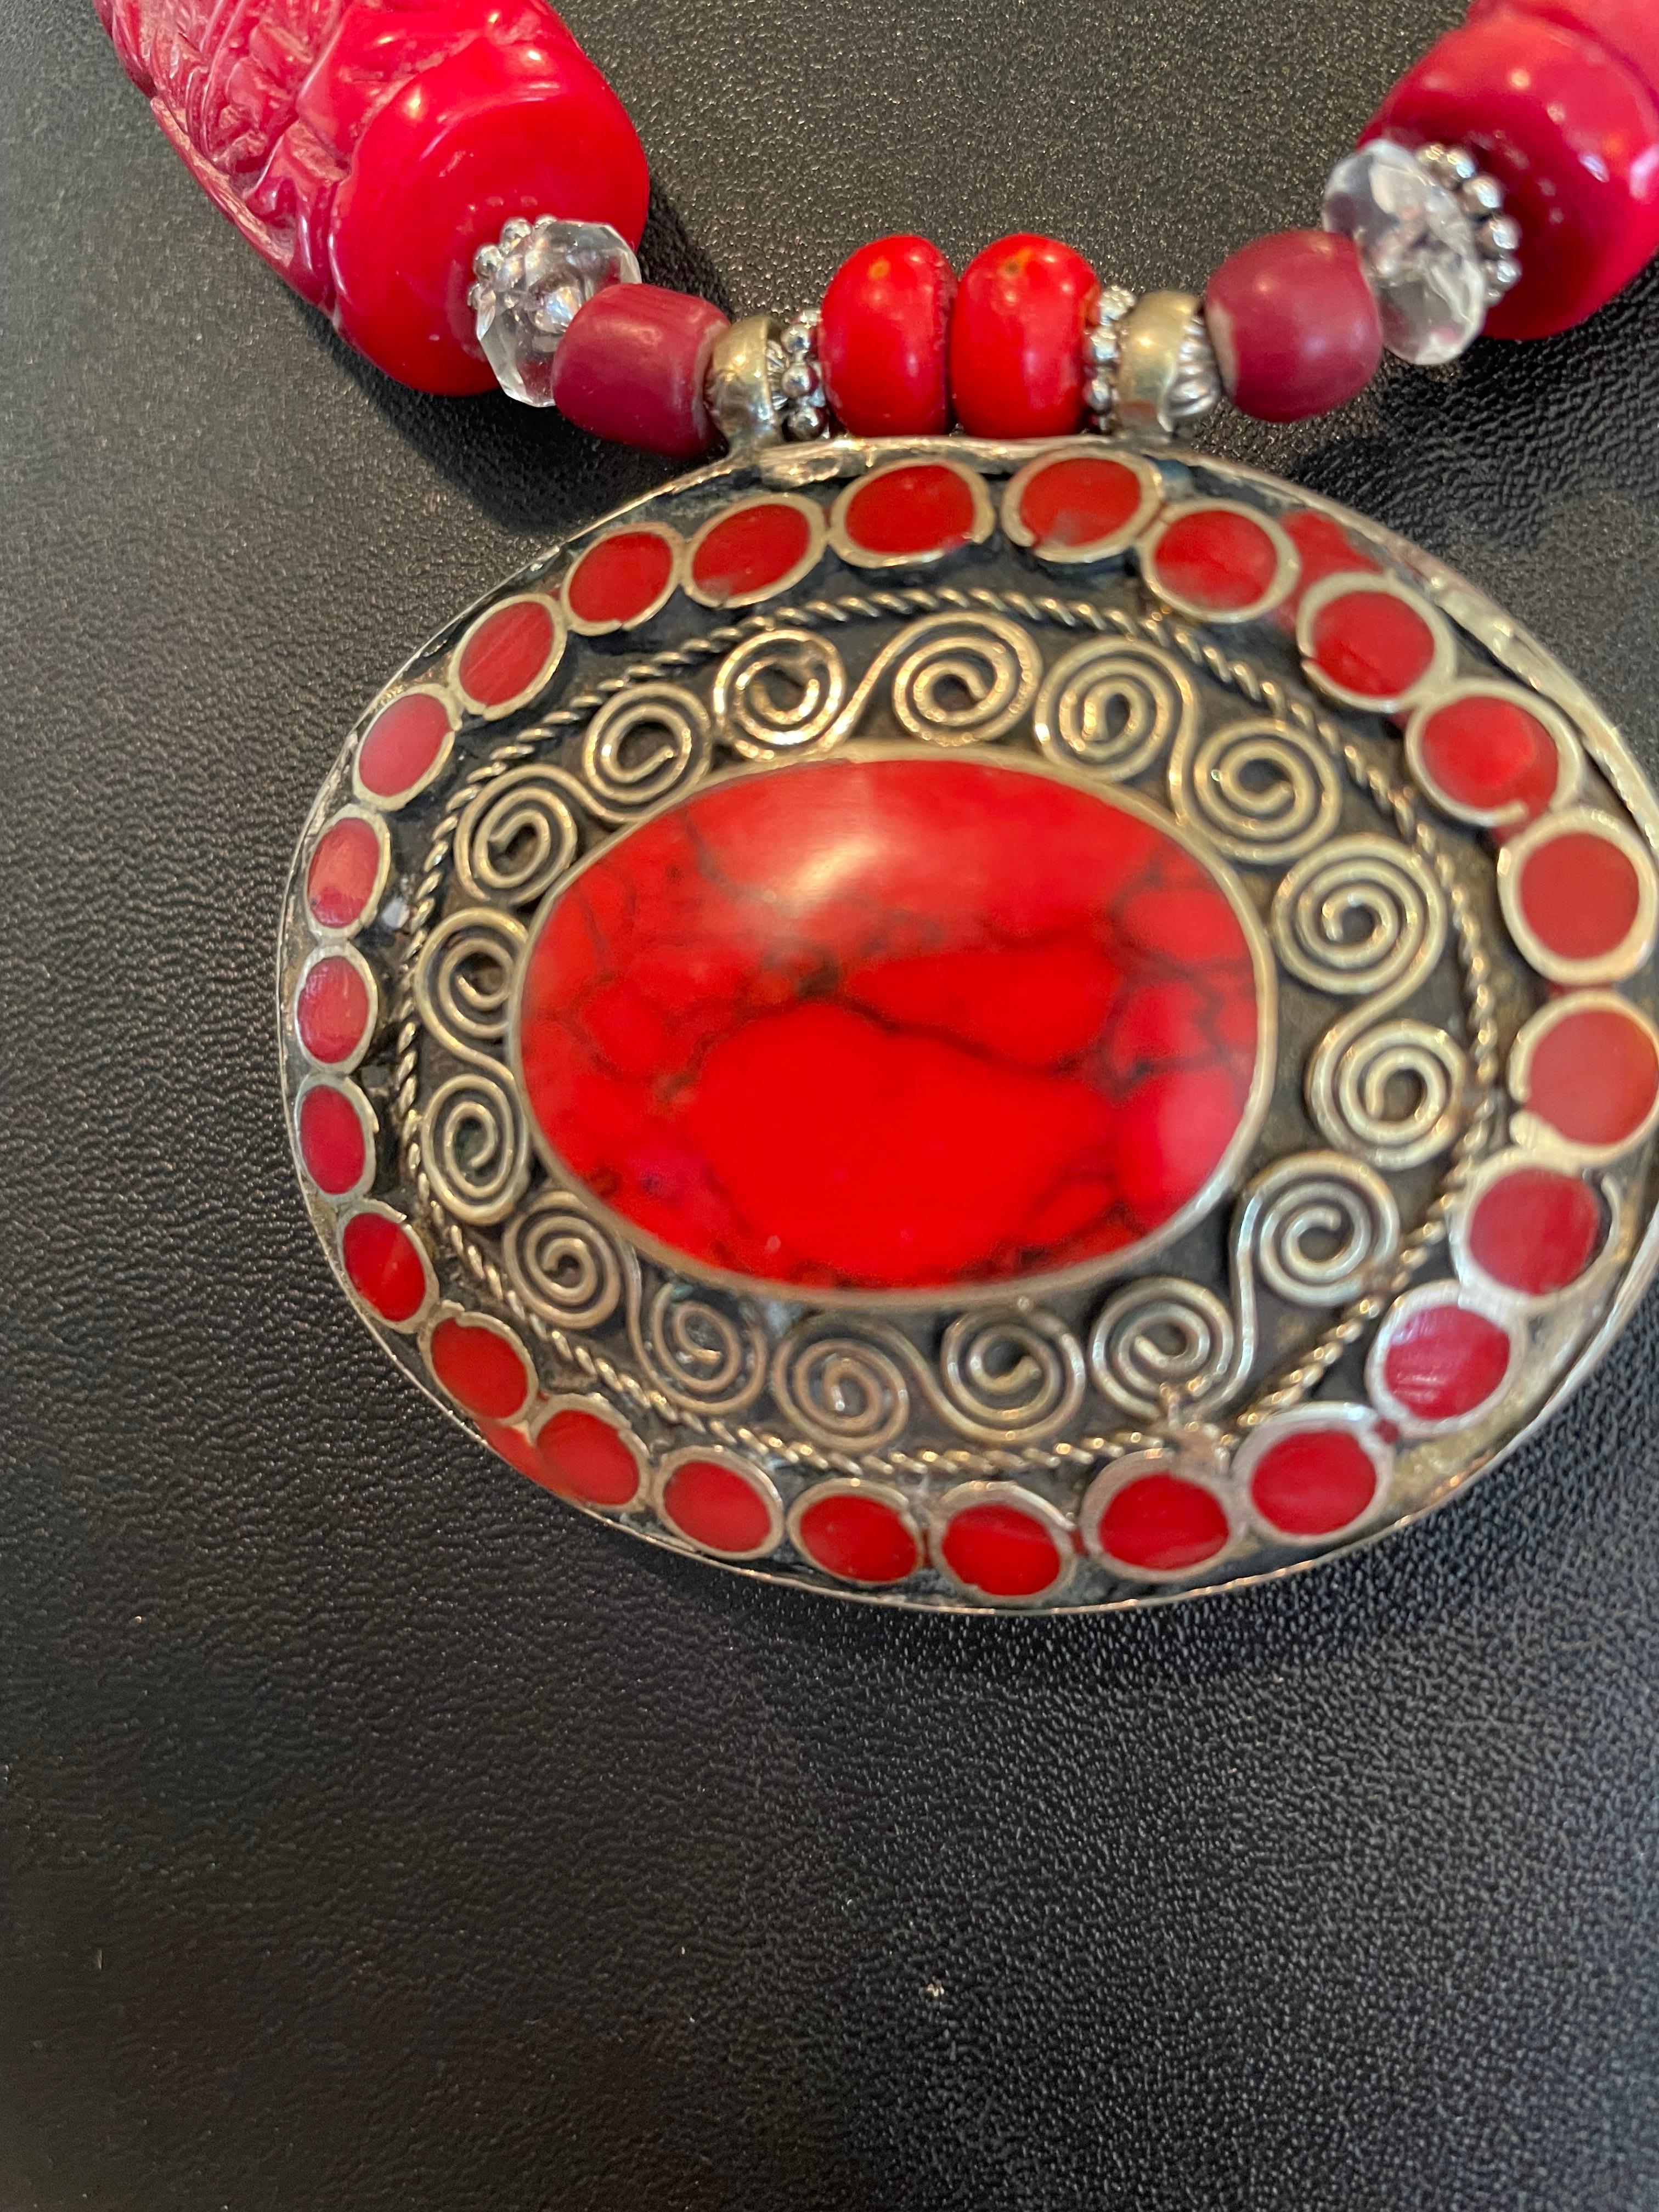 Lorraine’s Bijoux offers a Tribal Coral, Silver inlaid Tibetan pendant with intricate silver wirework. This necklace is a stunning casual look with carved coral beads, large chunks of red Bamboo Coral, coral inlaid Tibetan silver chased beads, red